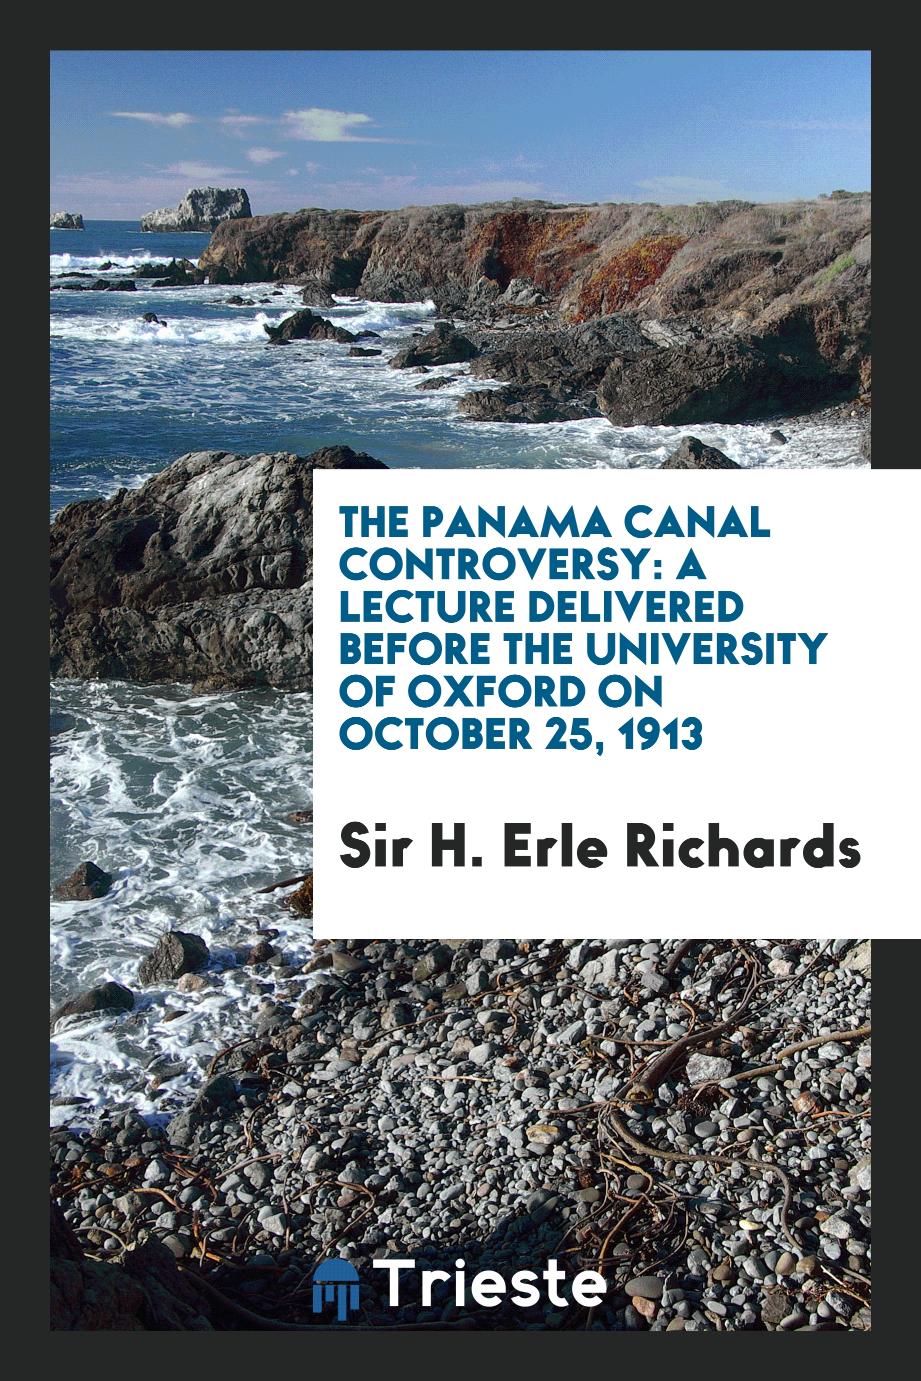 The Panama Canal Controversy: A Lecture Delivered Before the University of Oxford on October 25, 1913